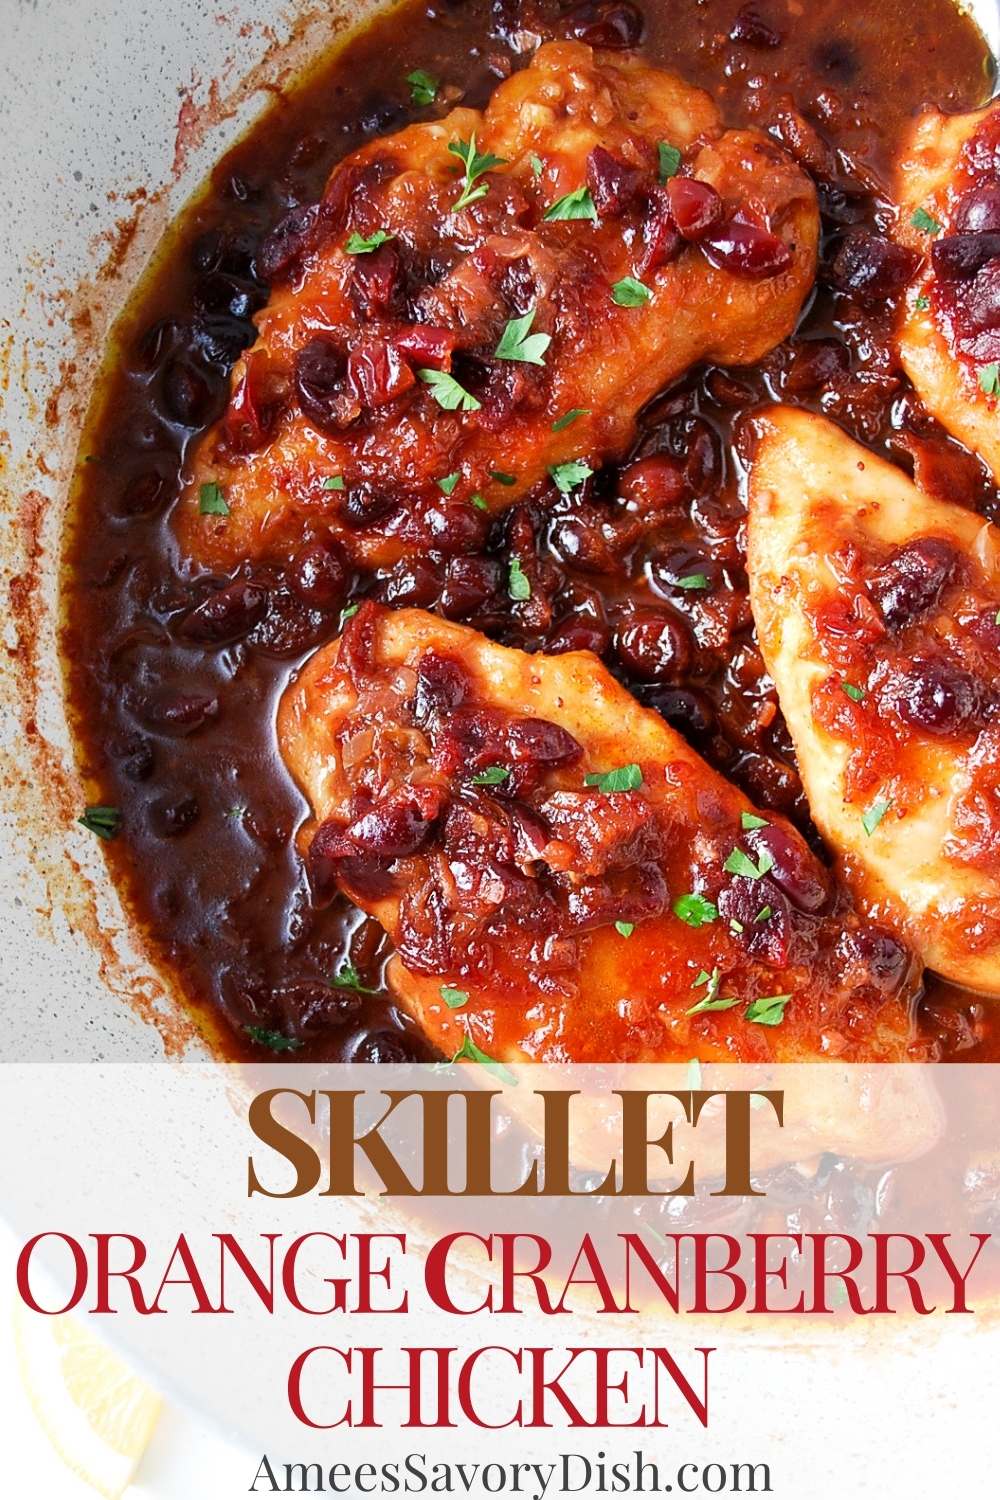 Skillet Orange Cranberry Chicken -crisp, pan-seared chicken breasts, simmered in a sweet and savory cranberry-orange sauce. via @Ameessavorydish